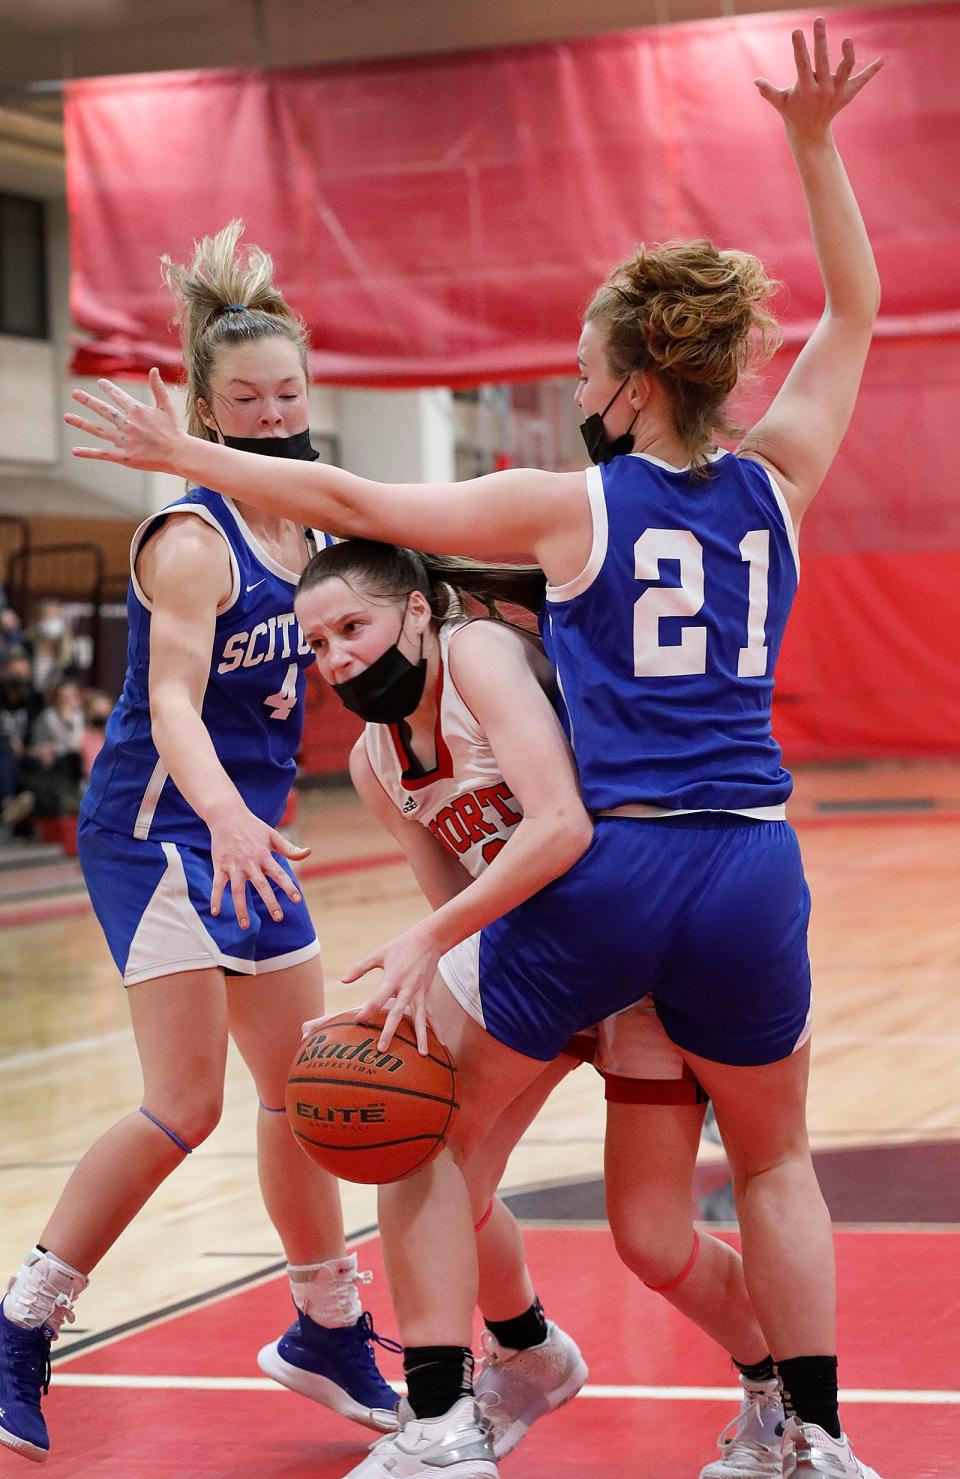 North Quincy captain Orlagh Gormley tries to squeeze between Scituate's Grace McNamara and Jordan Gardener to get off a shot during a game on Friday, Dec. 17, 2021.